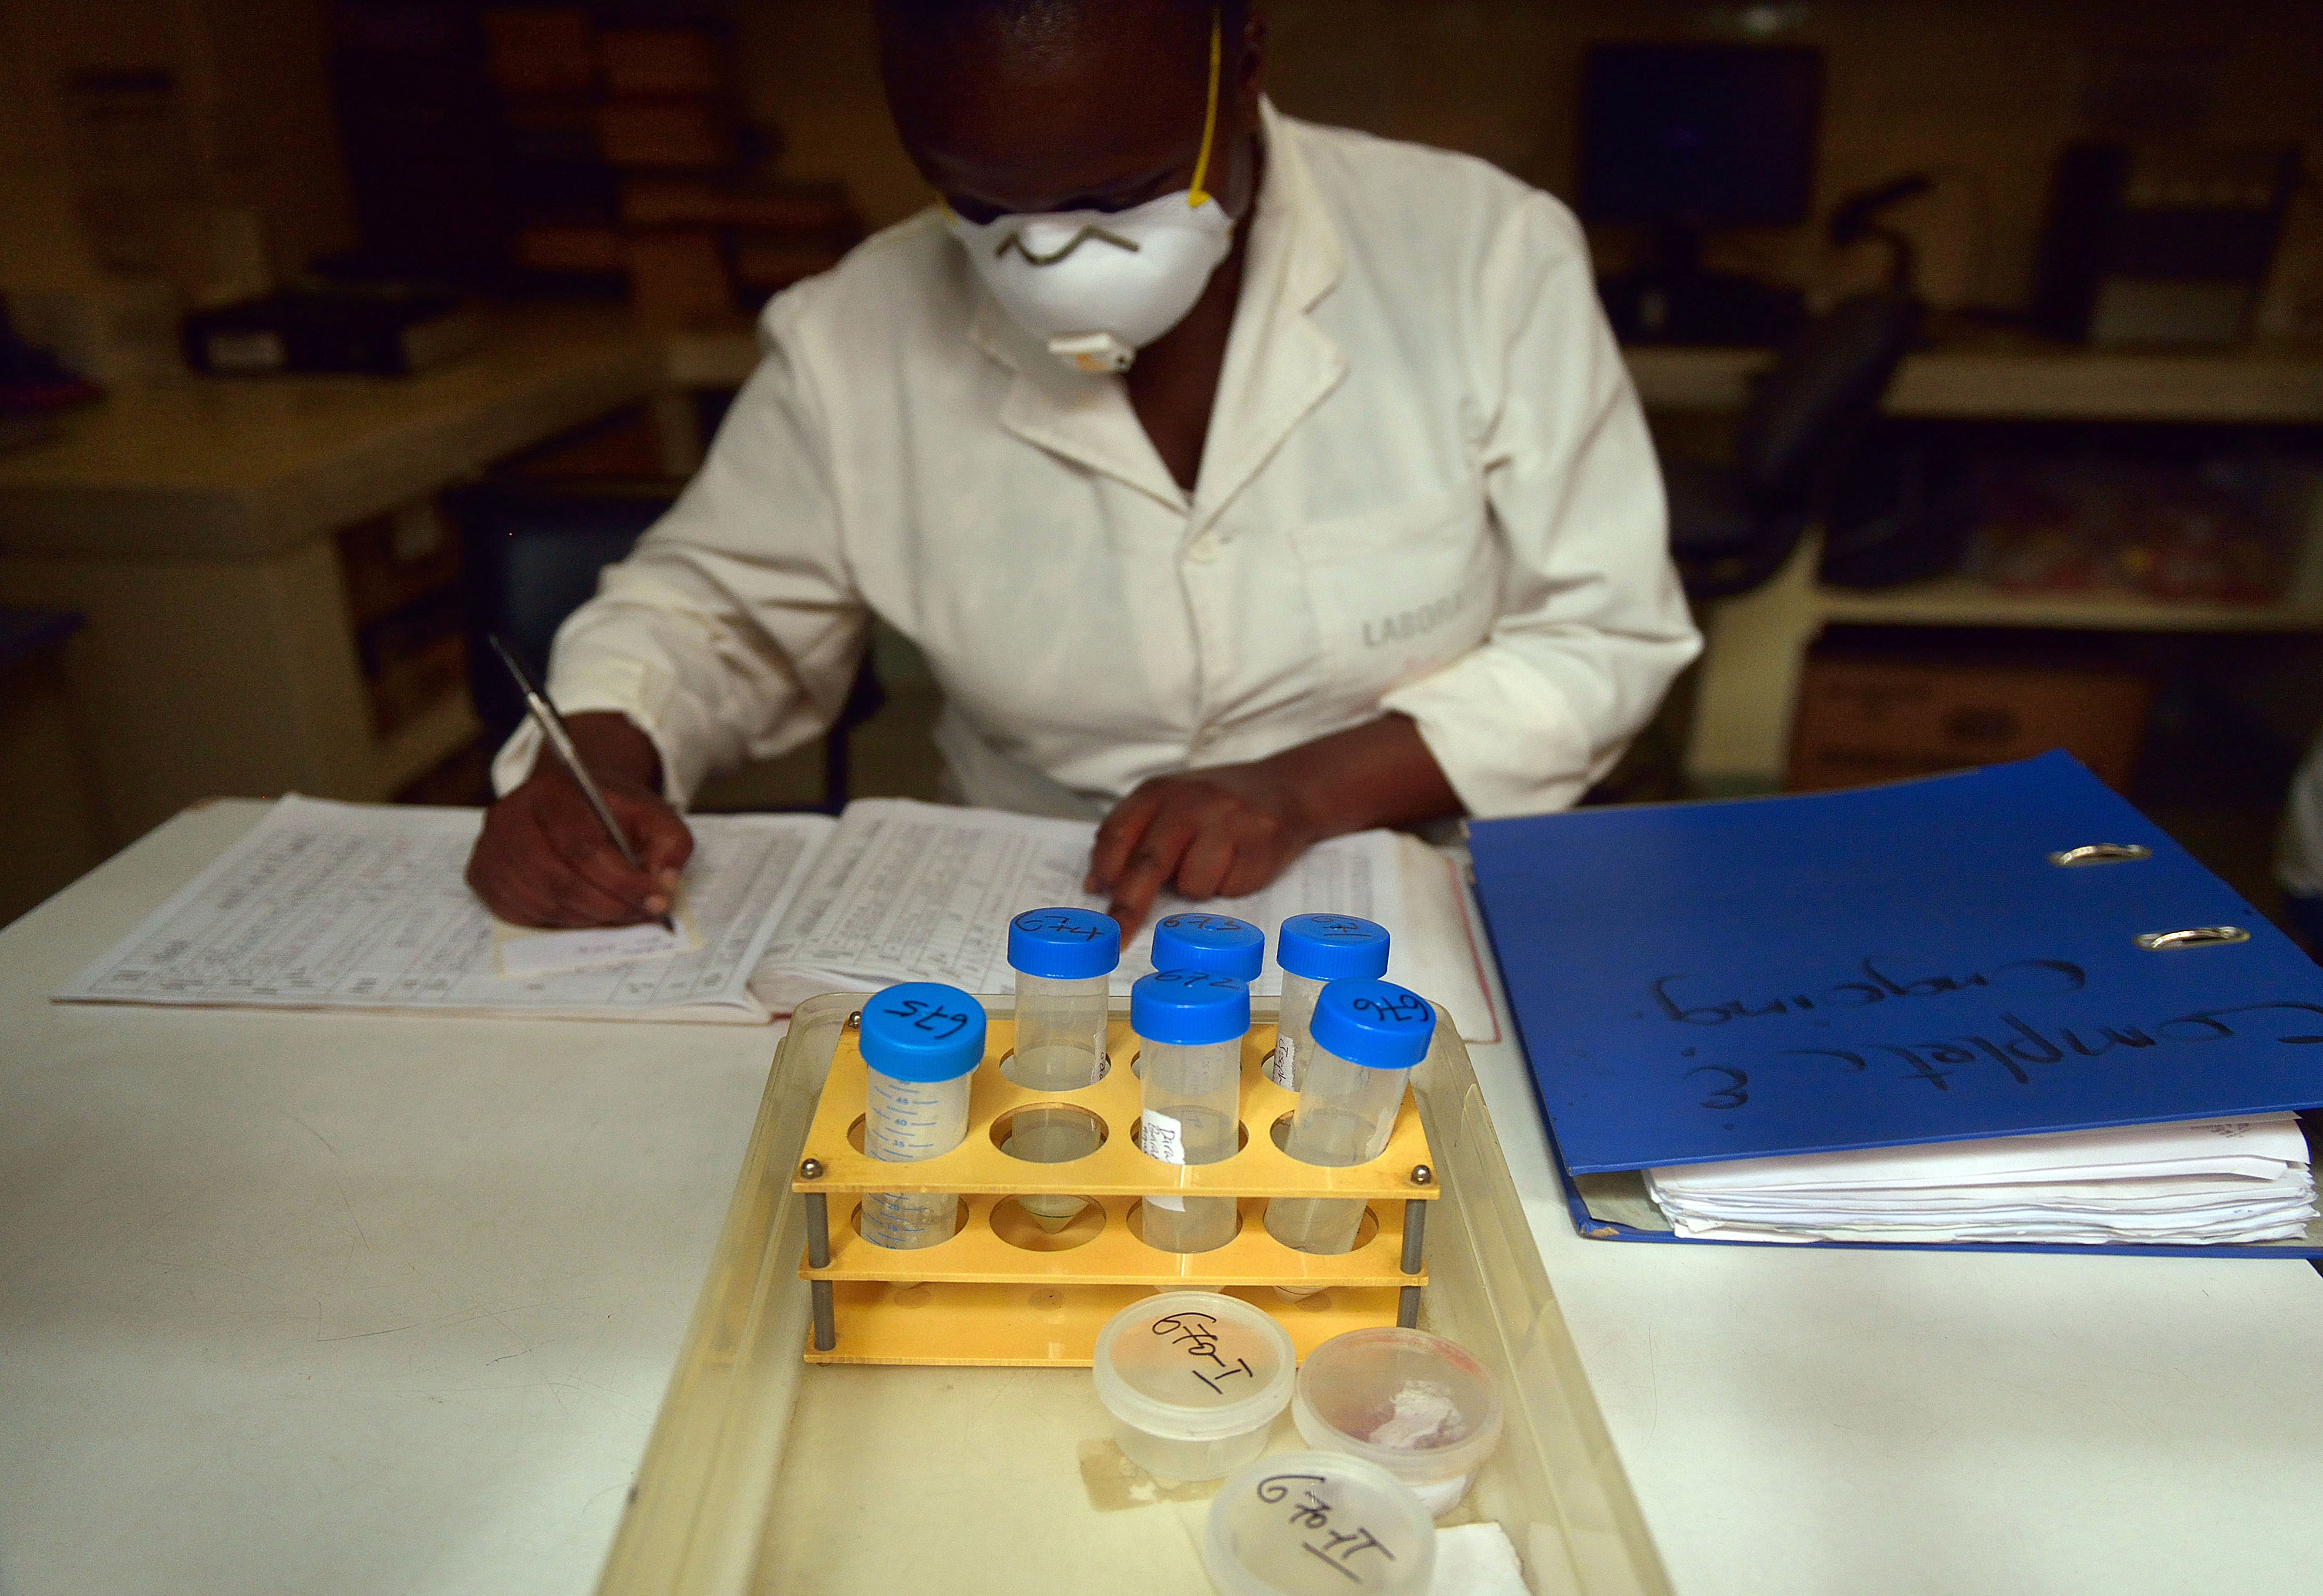 A person in a lab coat and mask sits at a table writing in a spreadsheet behind a tray holding vials of samples.